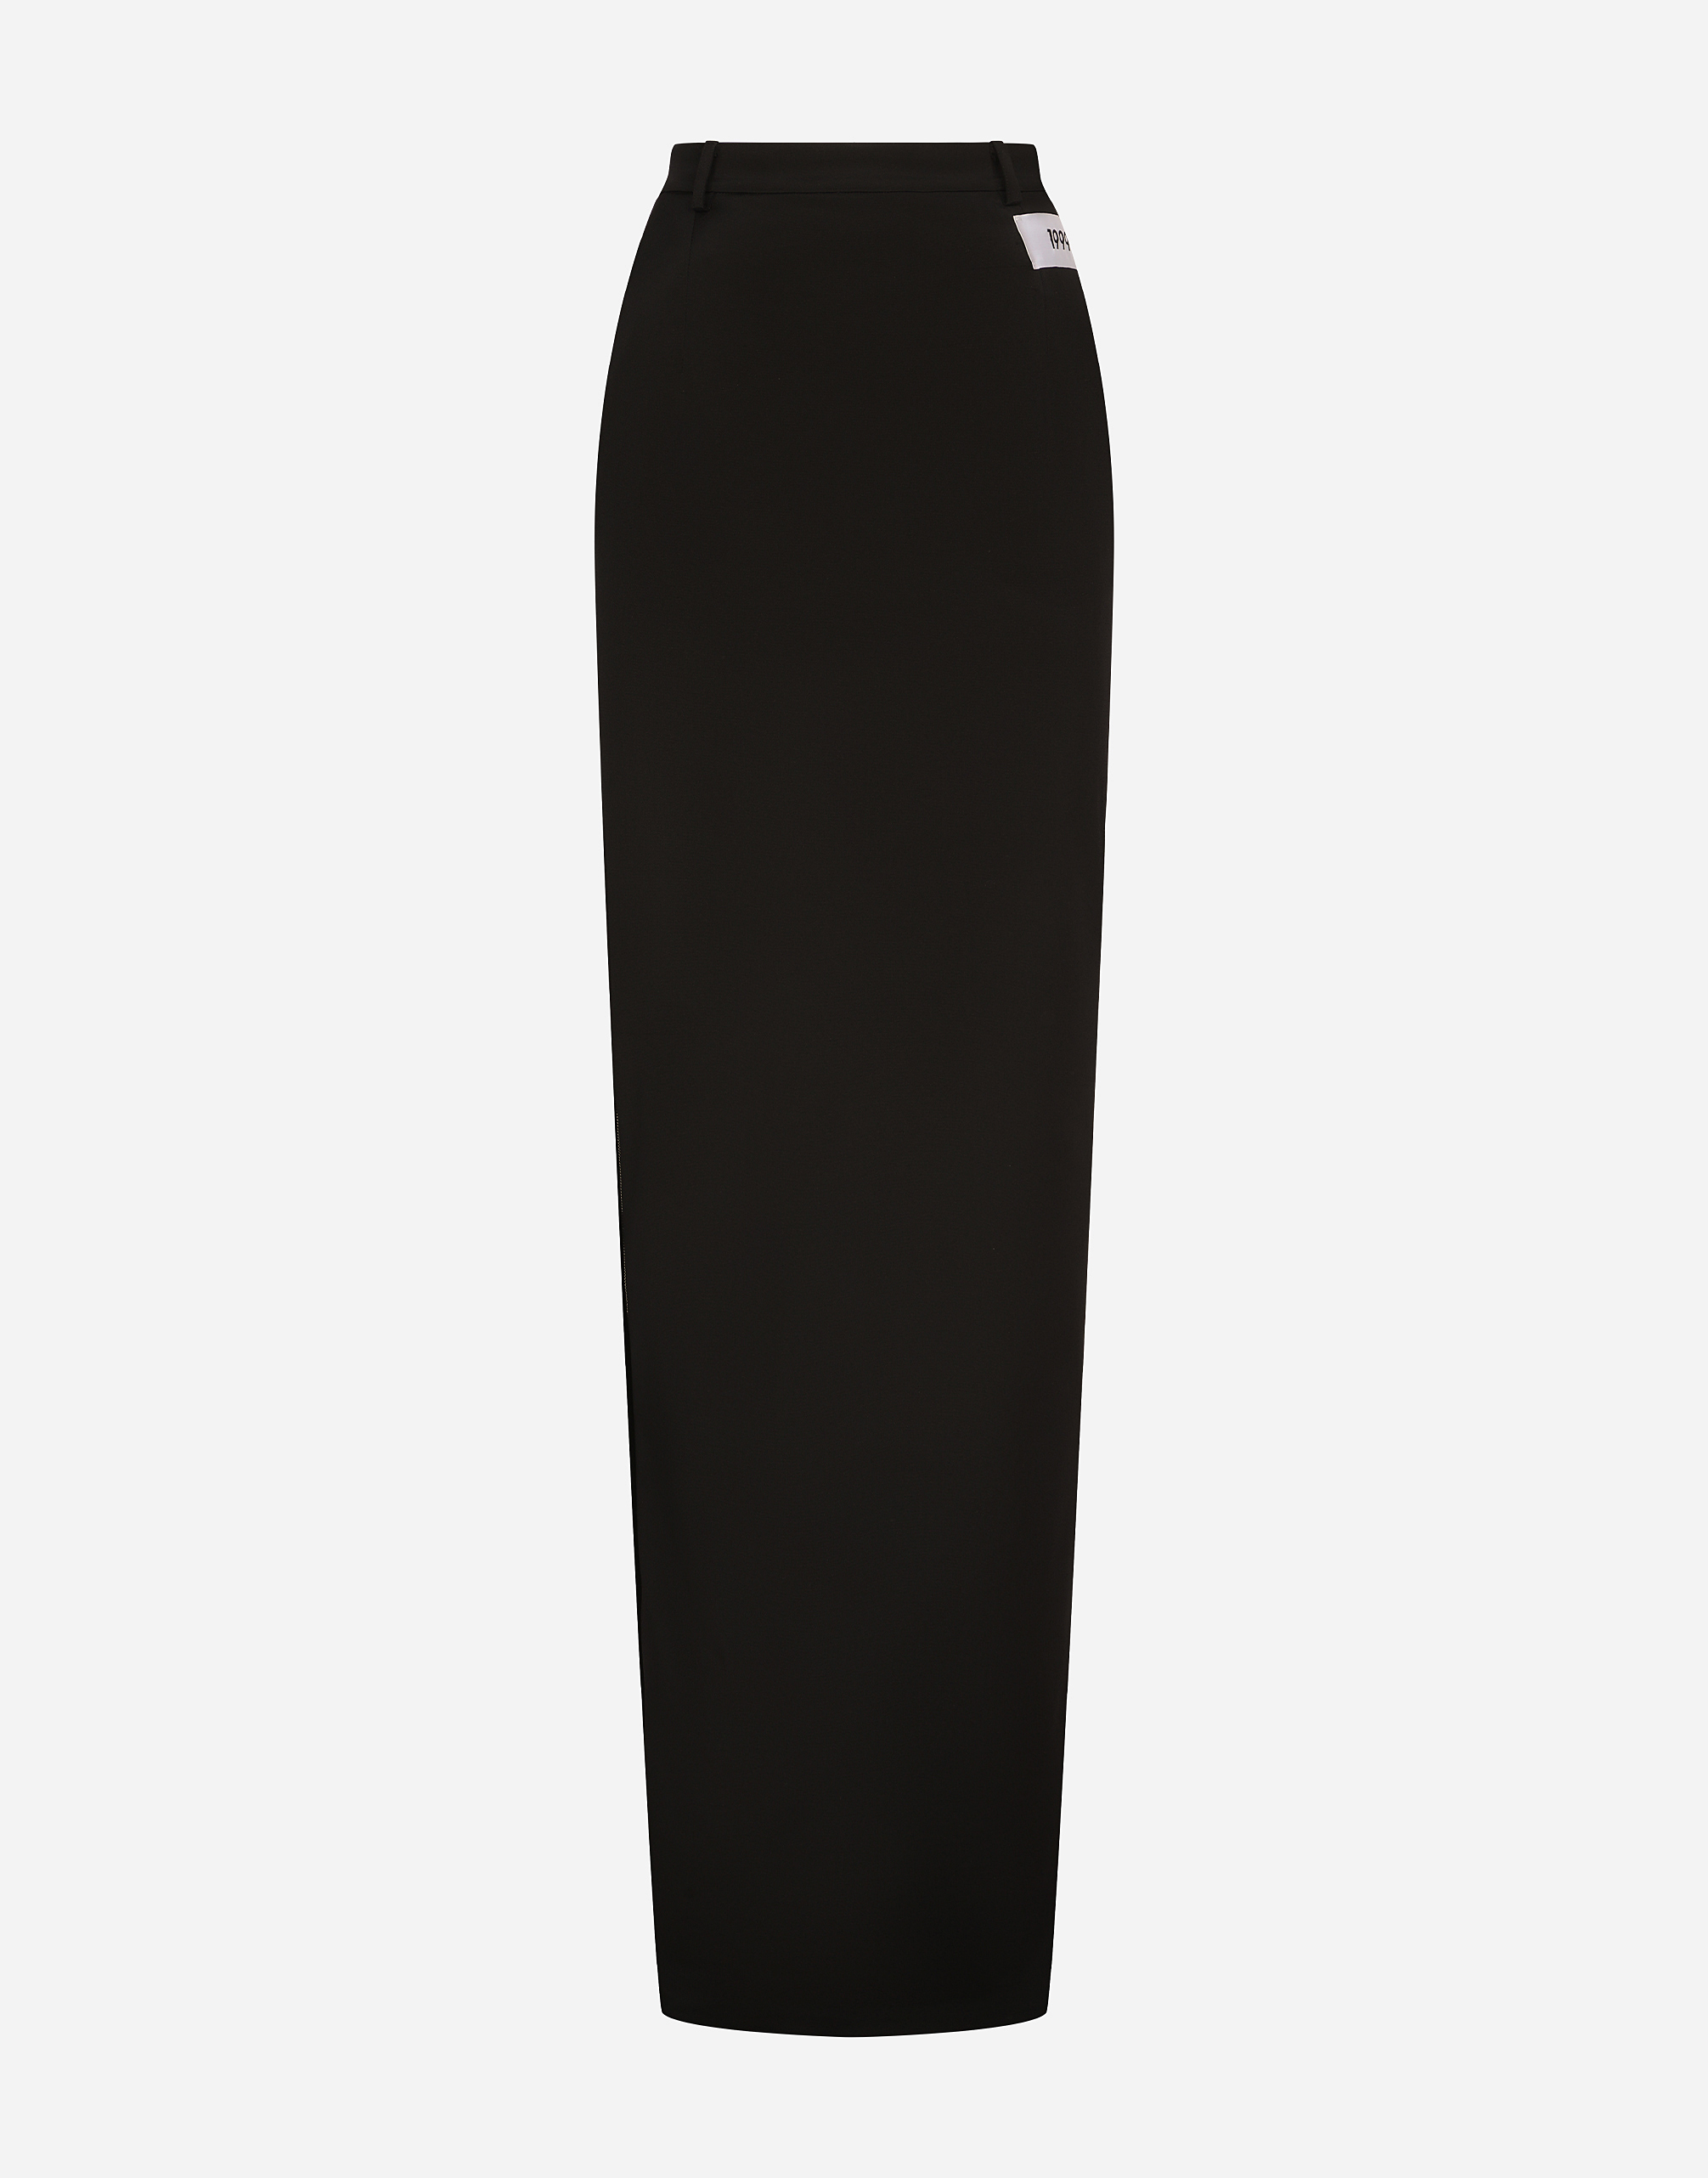 KIM DOLCE&GABBANA Long cady skirt with side zippers and slit in Black